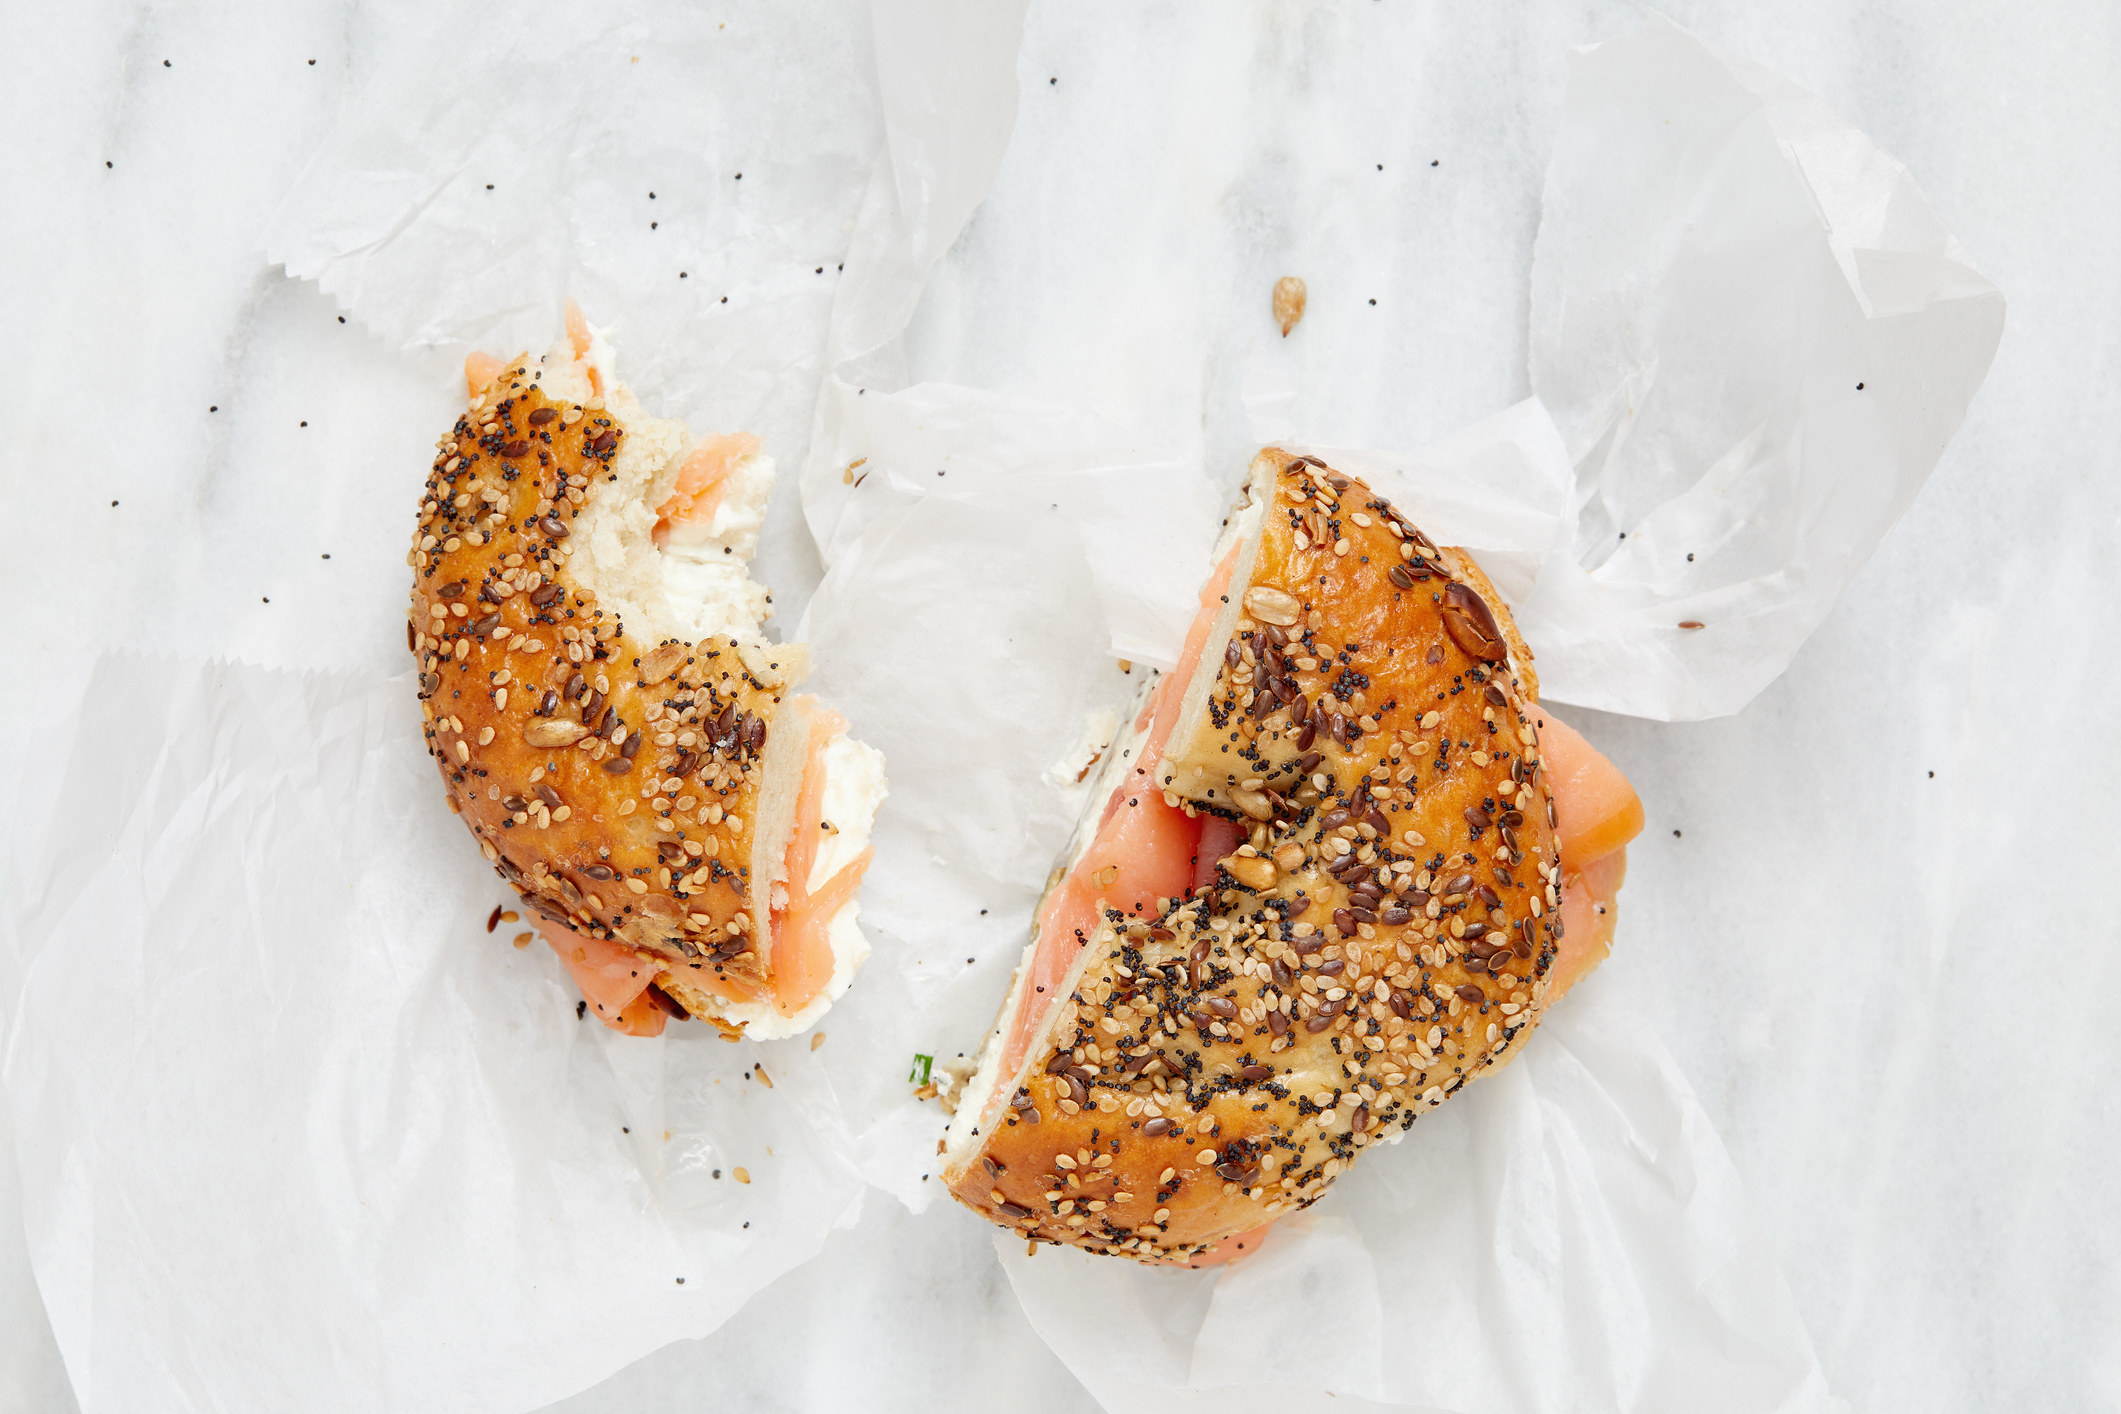 Overhead view of bagel with lox and cream cheese.